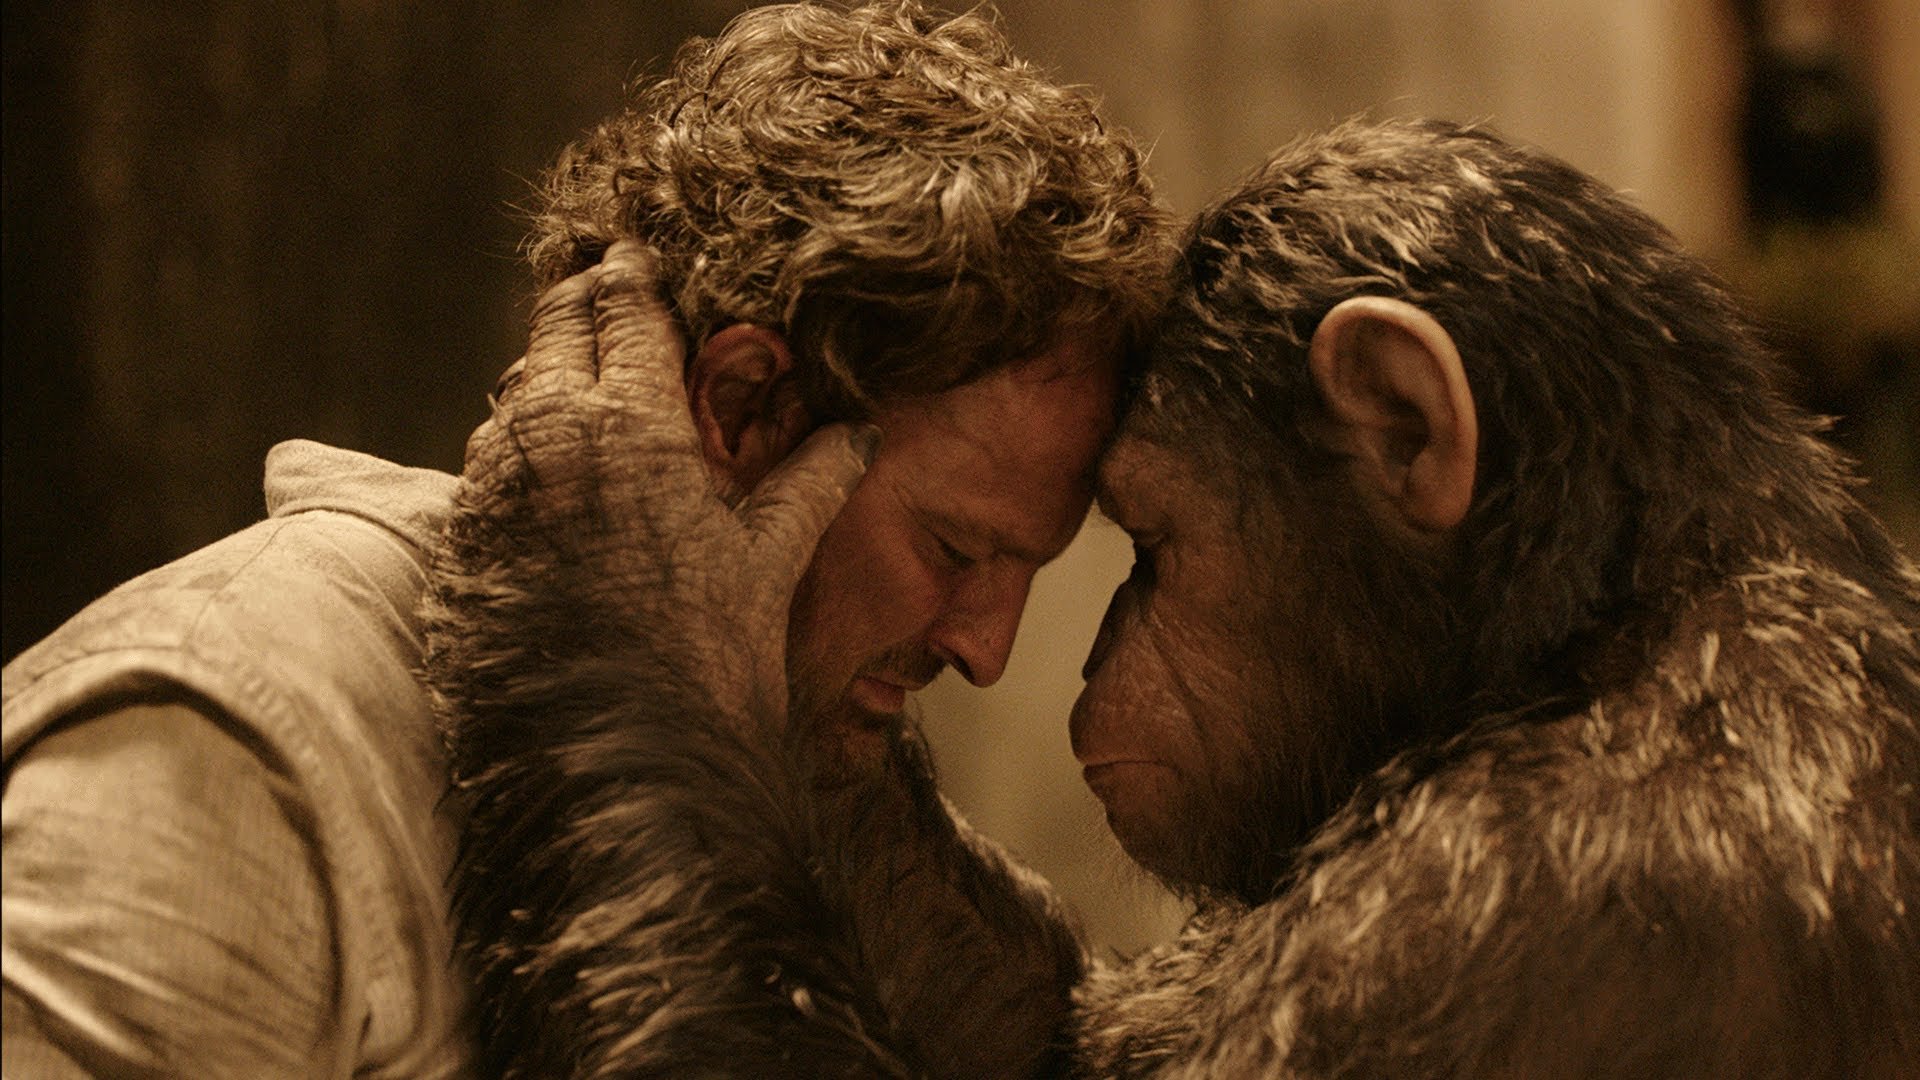 dawn of the apes, Action, Drama, Sci fi, Dawn, Planet, Apes, Monkey, Adventure,  33 Wallpaper